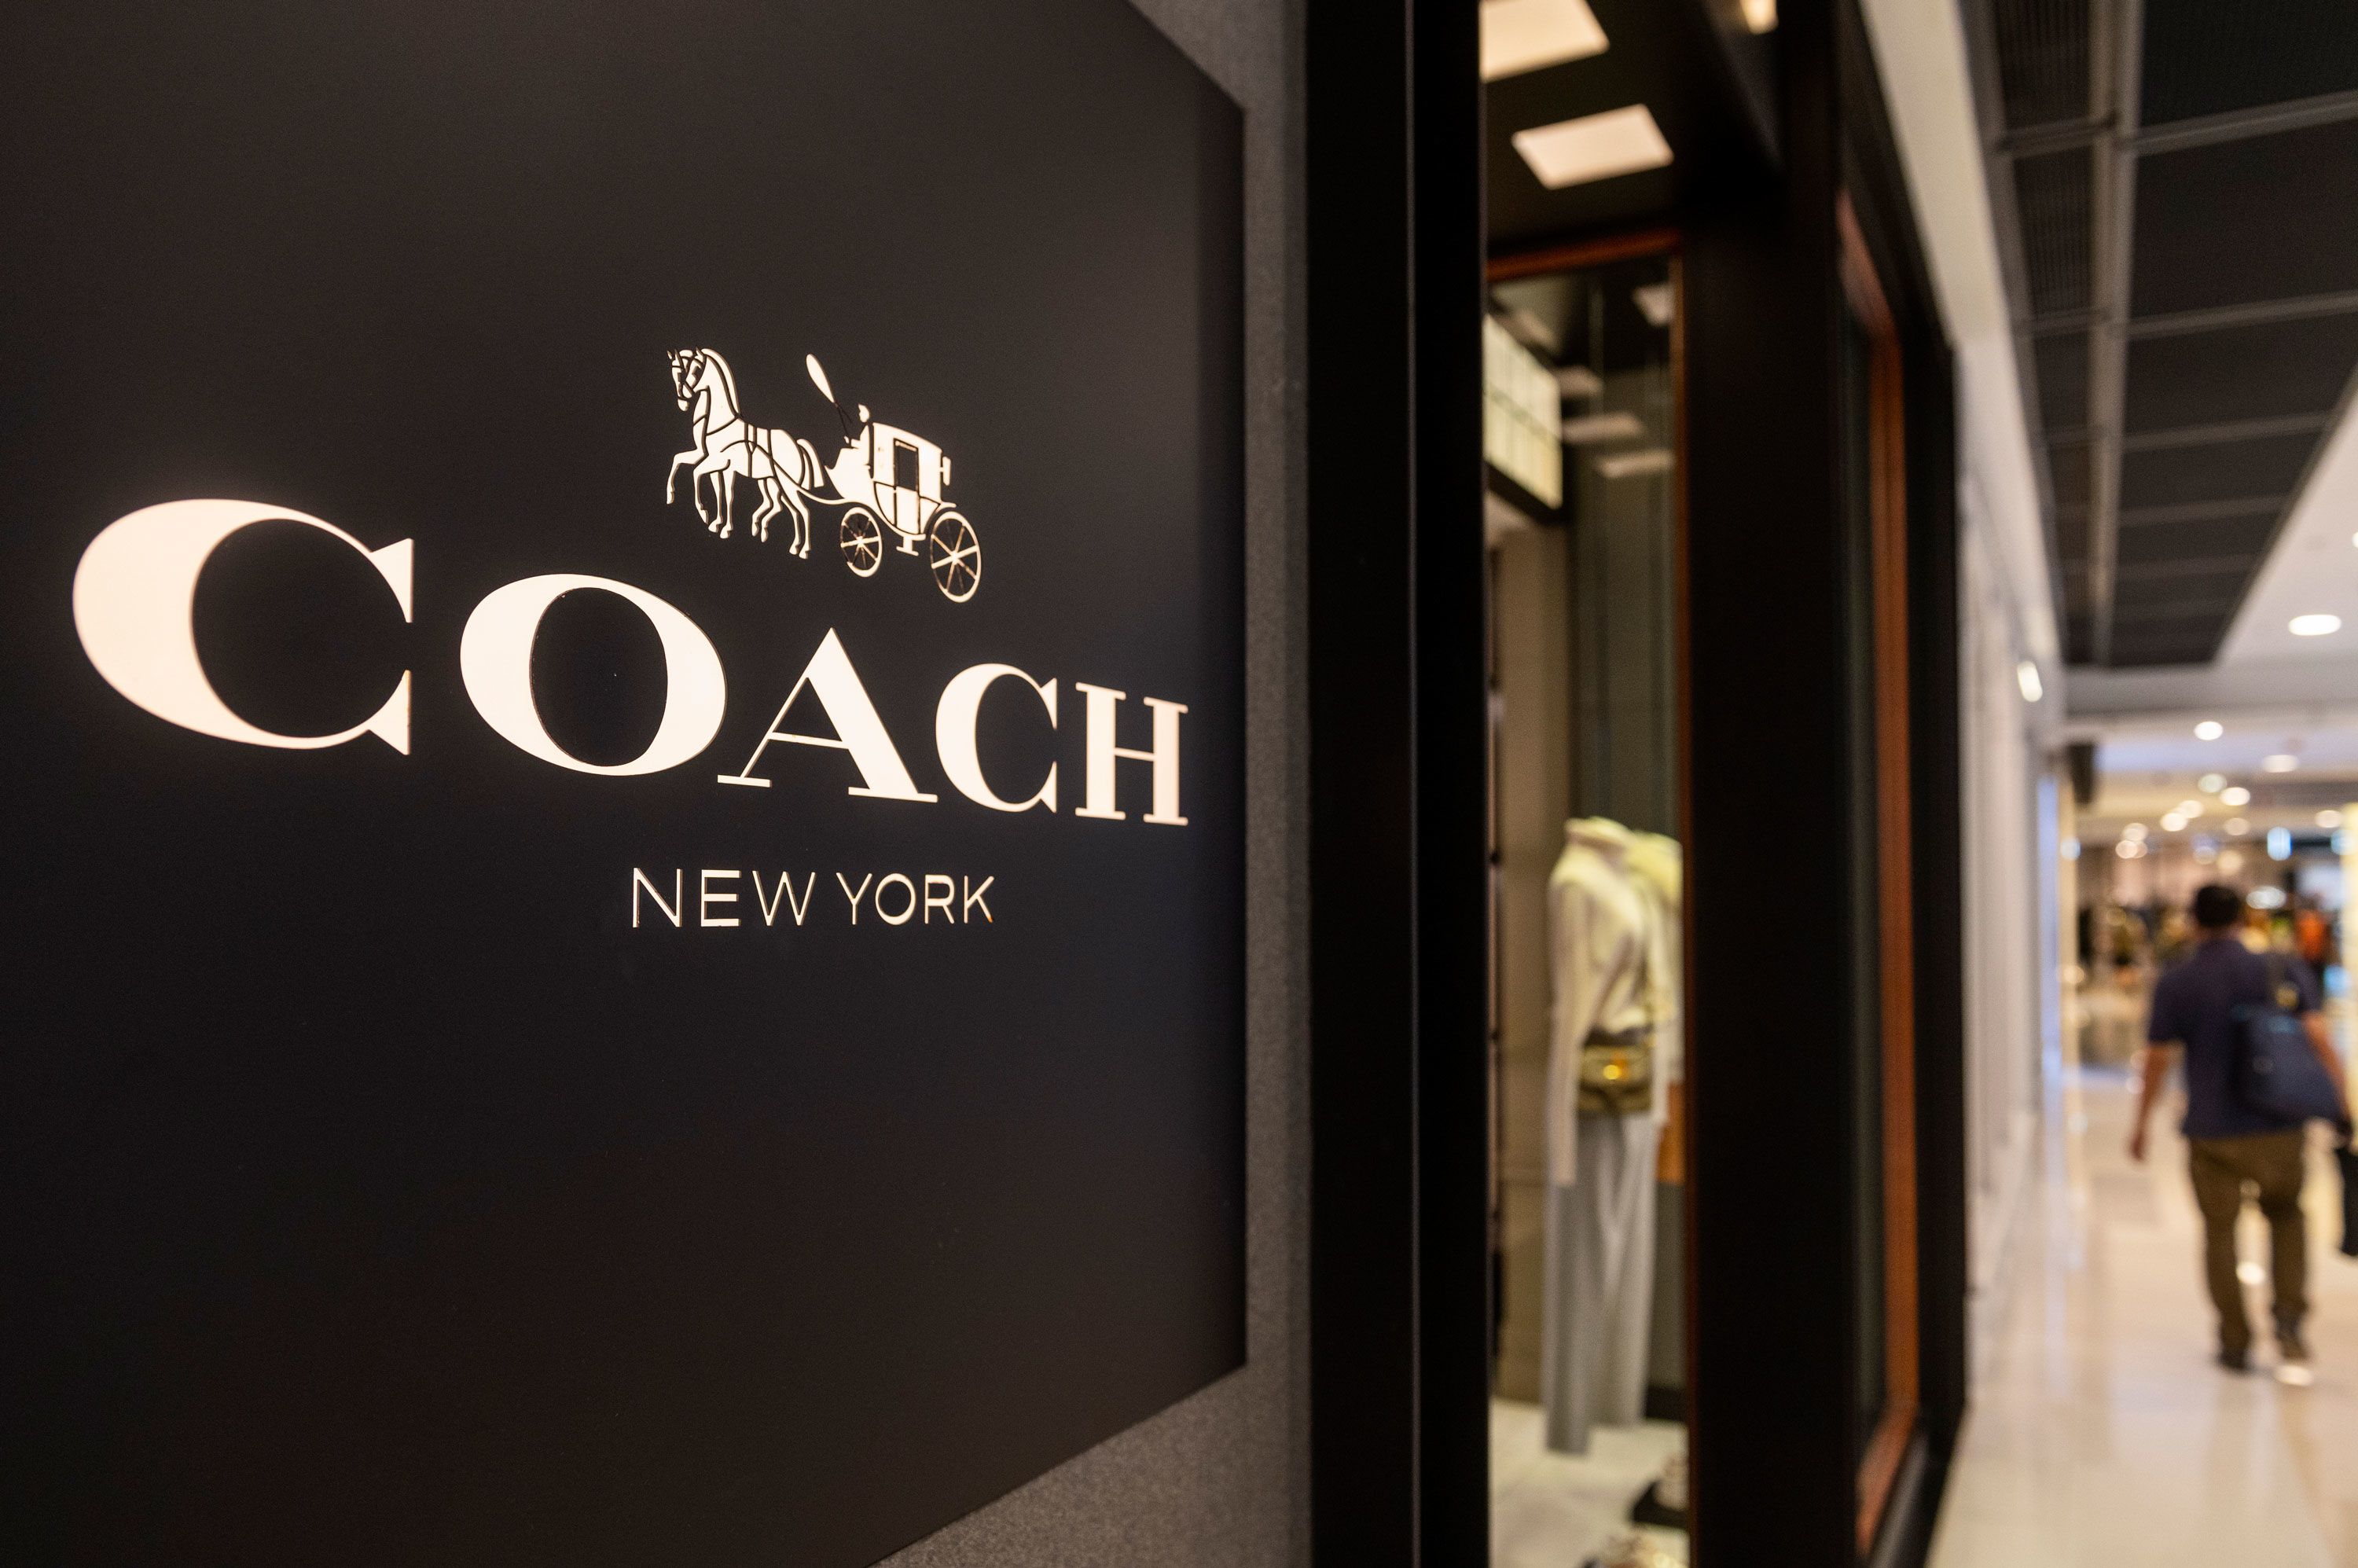 Coach will stop destroying unwanted goods following TikTok outrage